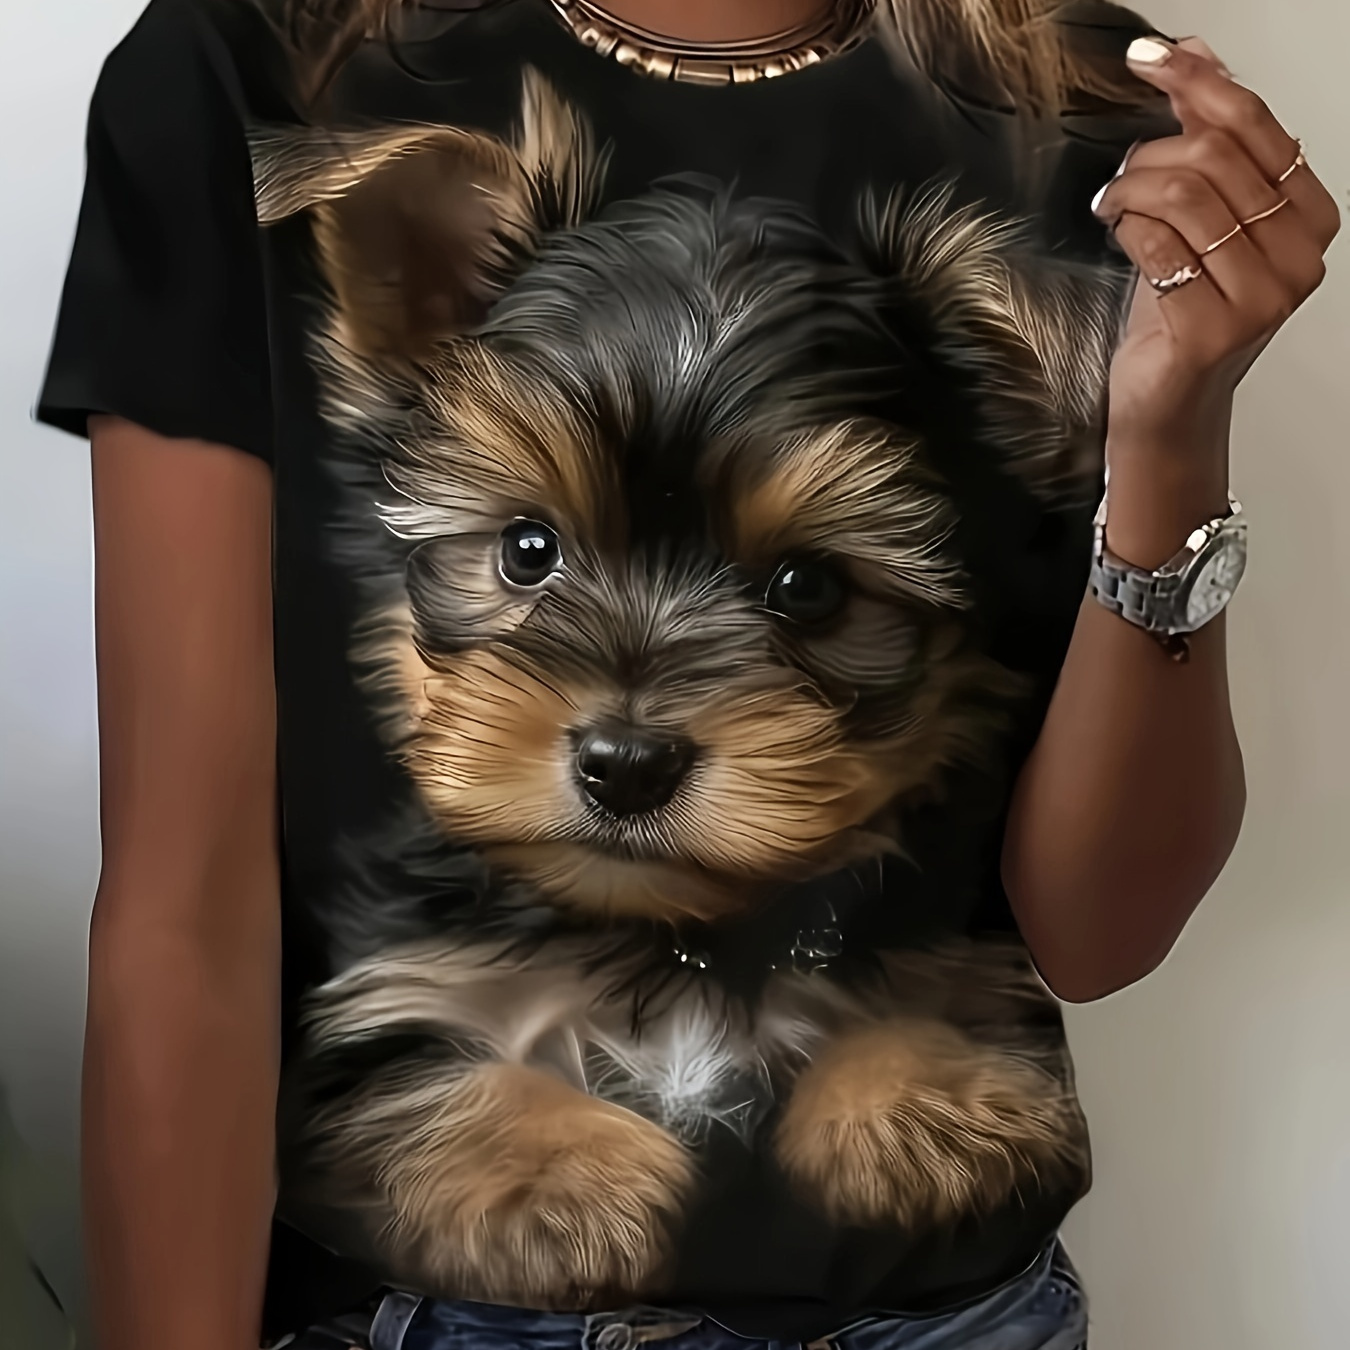 

Dog Print T-shirt, Casual Short Sleeve Crew Neck Top For Spring & Summer, Women's Clothing